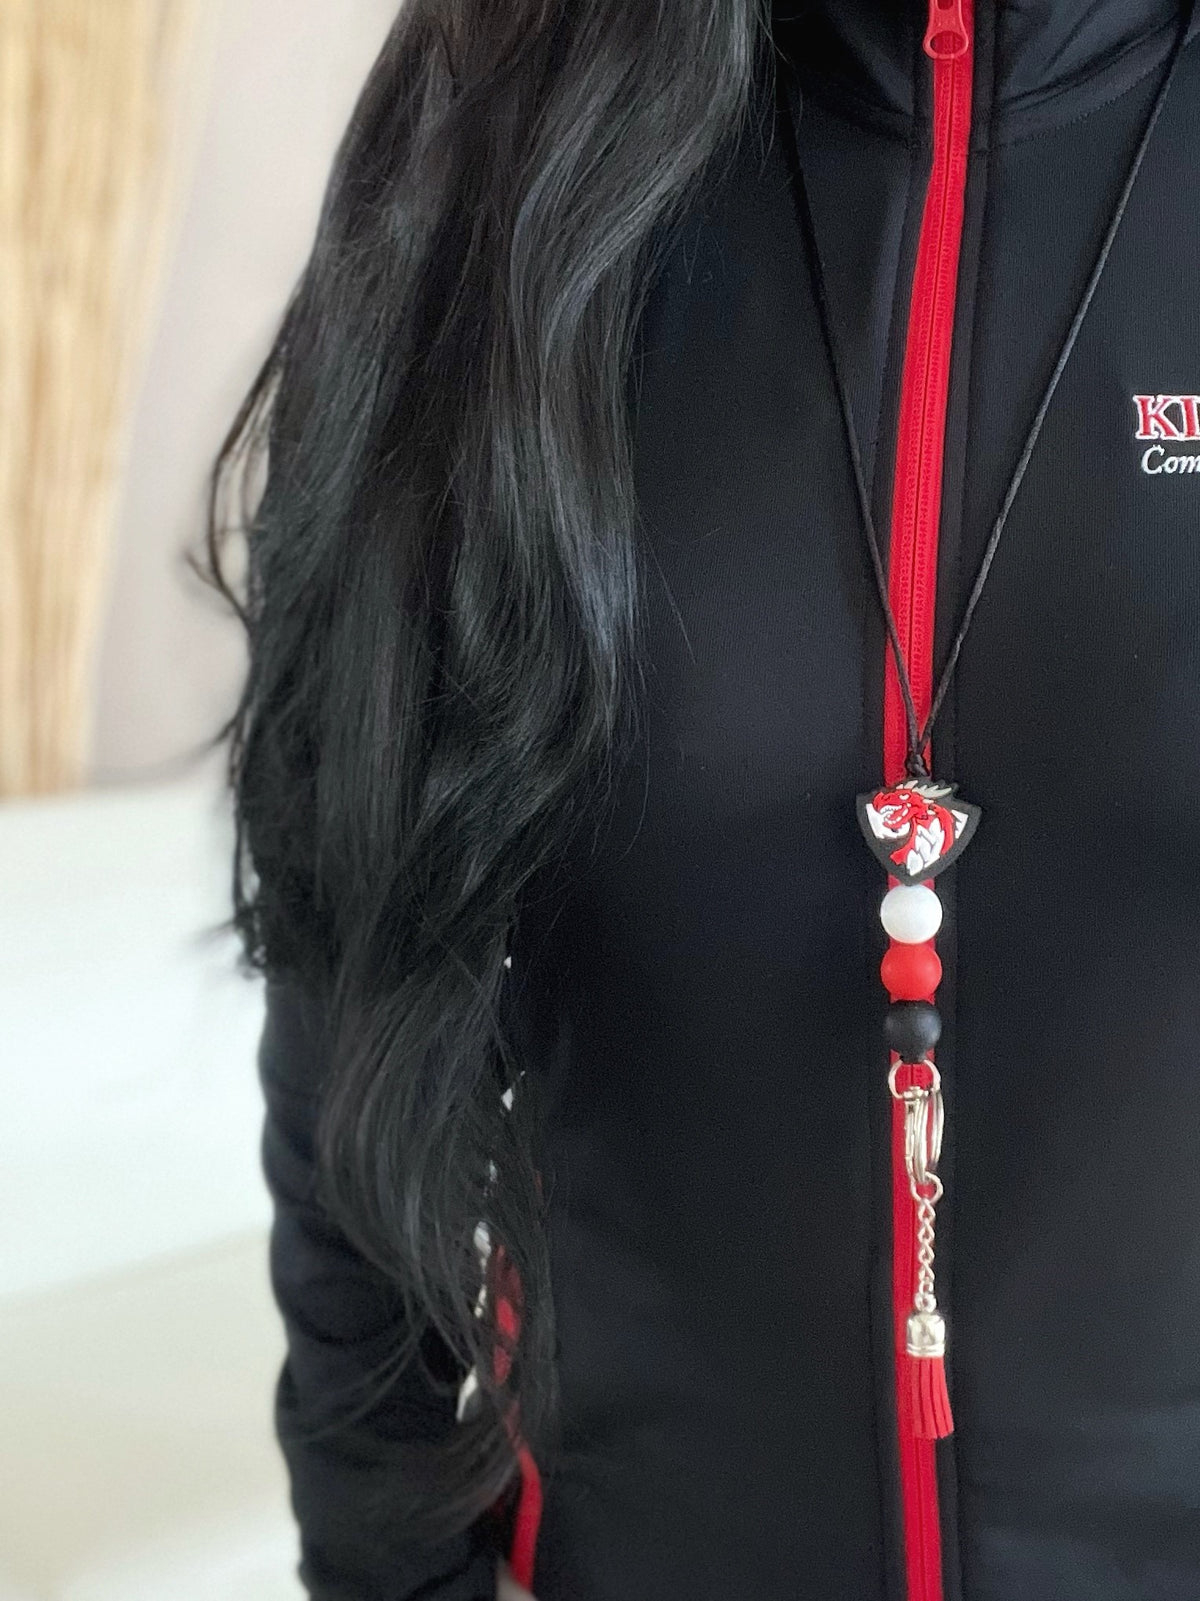 Close Up of woman with long black hair wearing a dragon lanyard with a red tassel and black, red, and white silicone beads